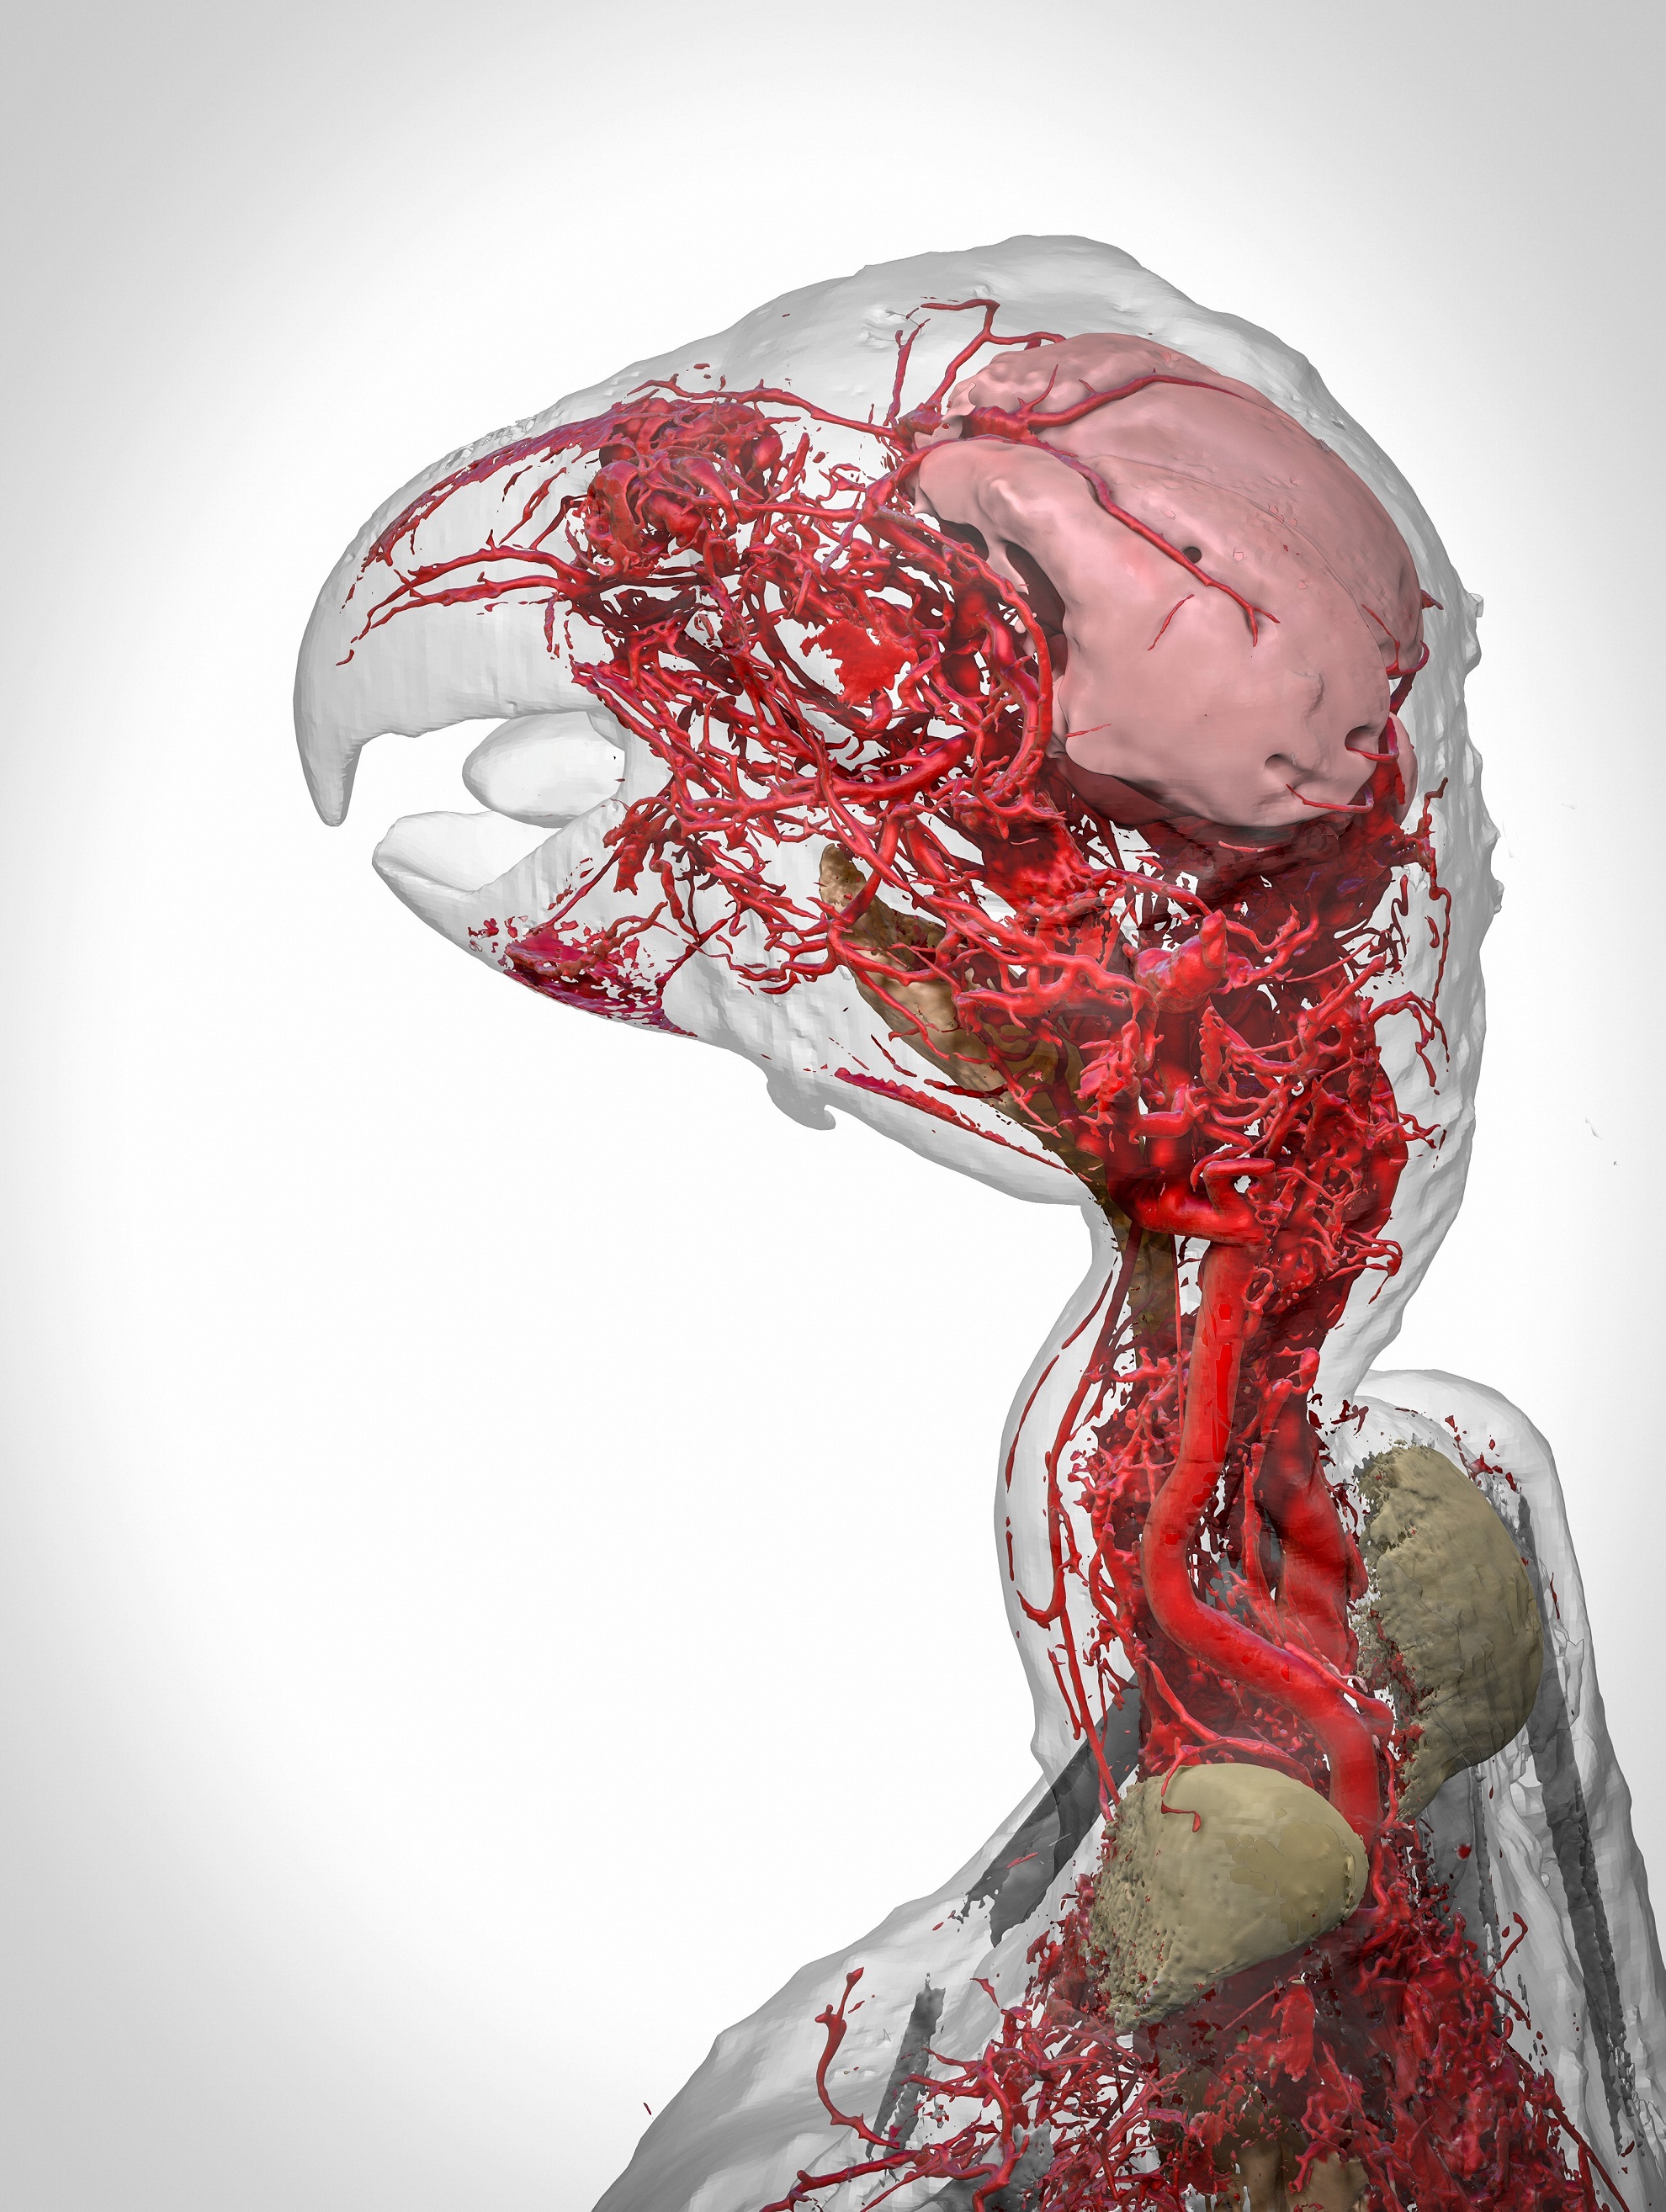 This image shows a 3D reconstruction of an African grey parrot, post euthanasia. The 3D model details the highly intricate system of blood vessels in the head and neck of the bird and was made possible through the use of a new research contrast agent called BriteVu (invented by Scott Echols). This contrast agent allows researchers to study a subject’s vascular system in incredible detail, right down to the capillary level.